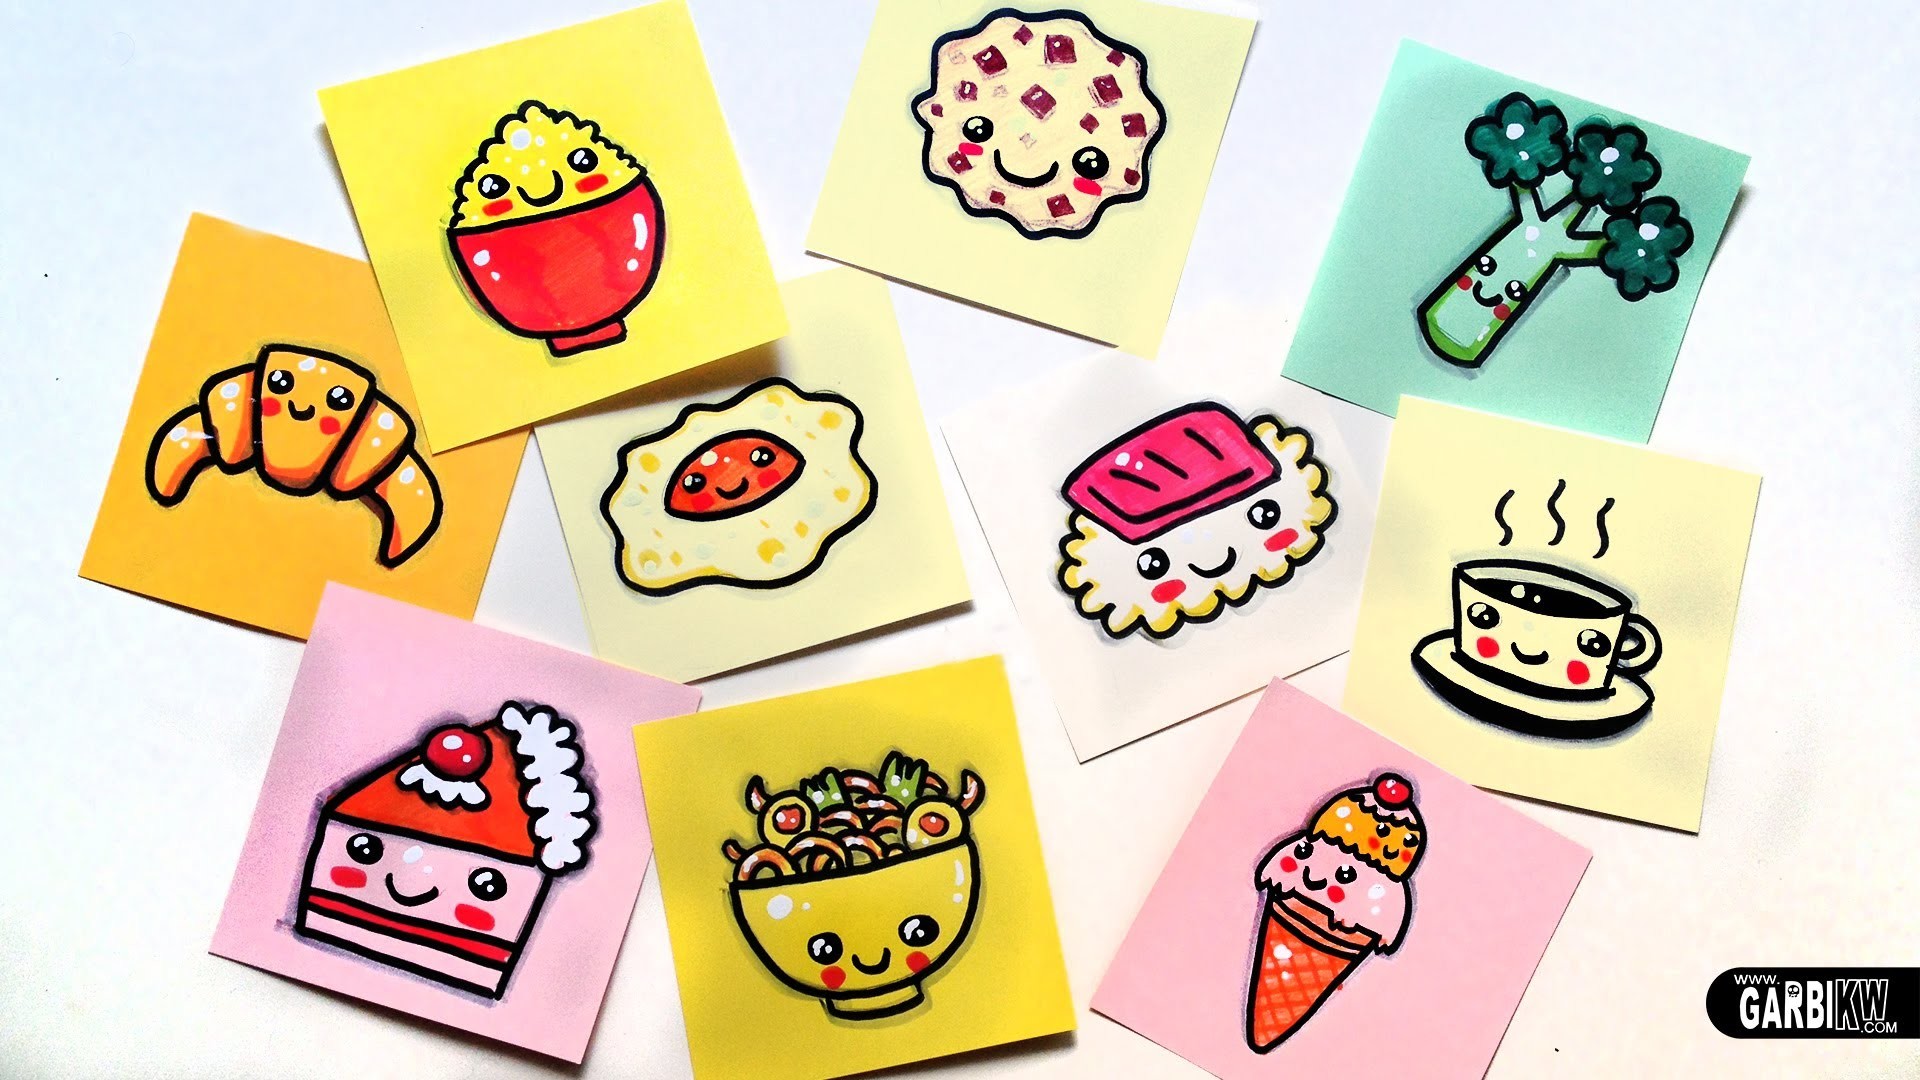 1920x1080 How To Draw Cute Food - news Easy and Kawaii Drawings by Garbi KW - YouTube